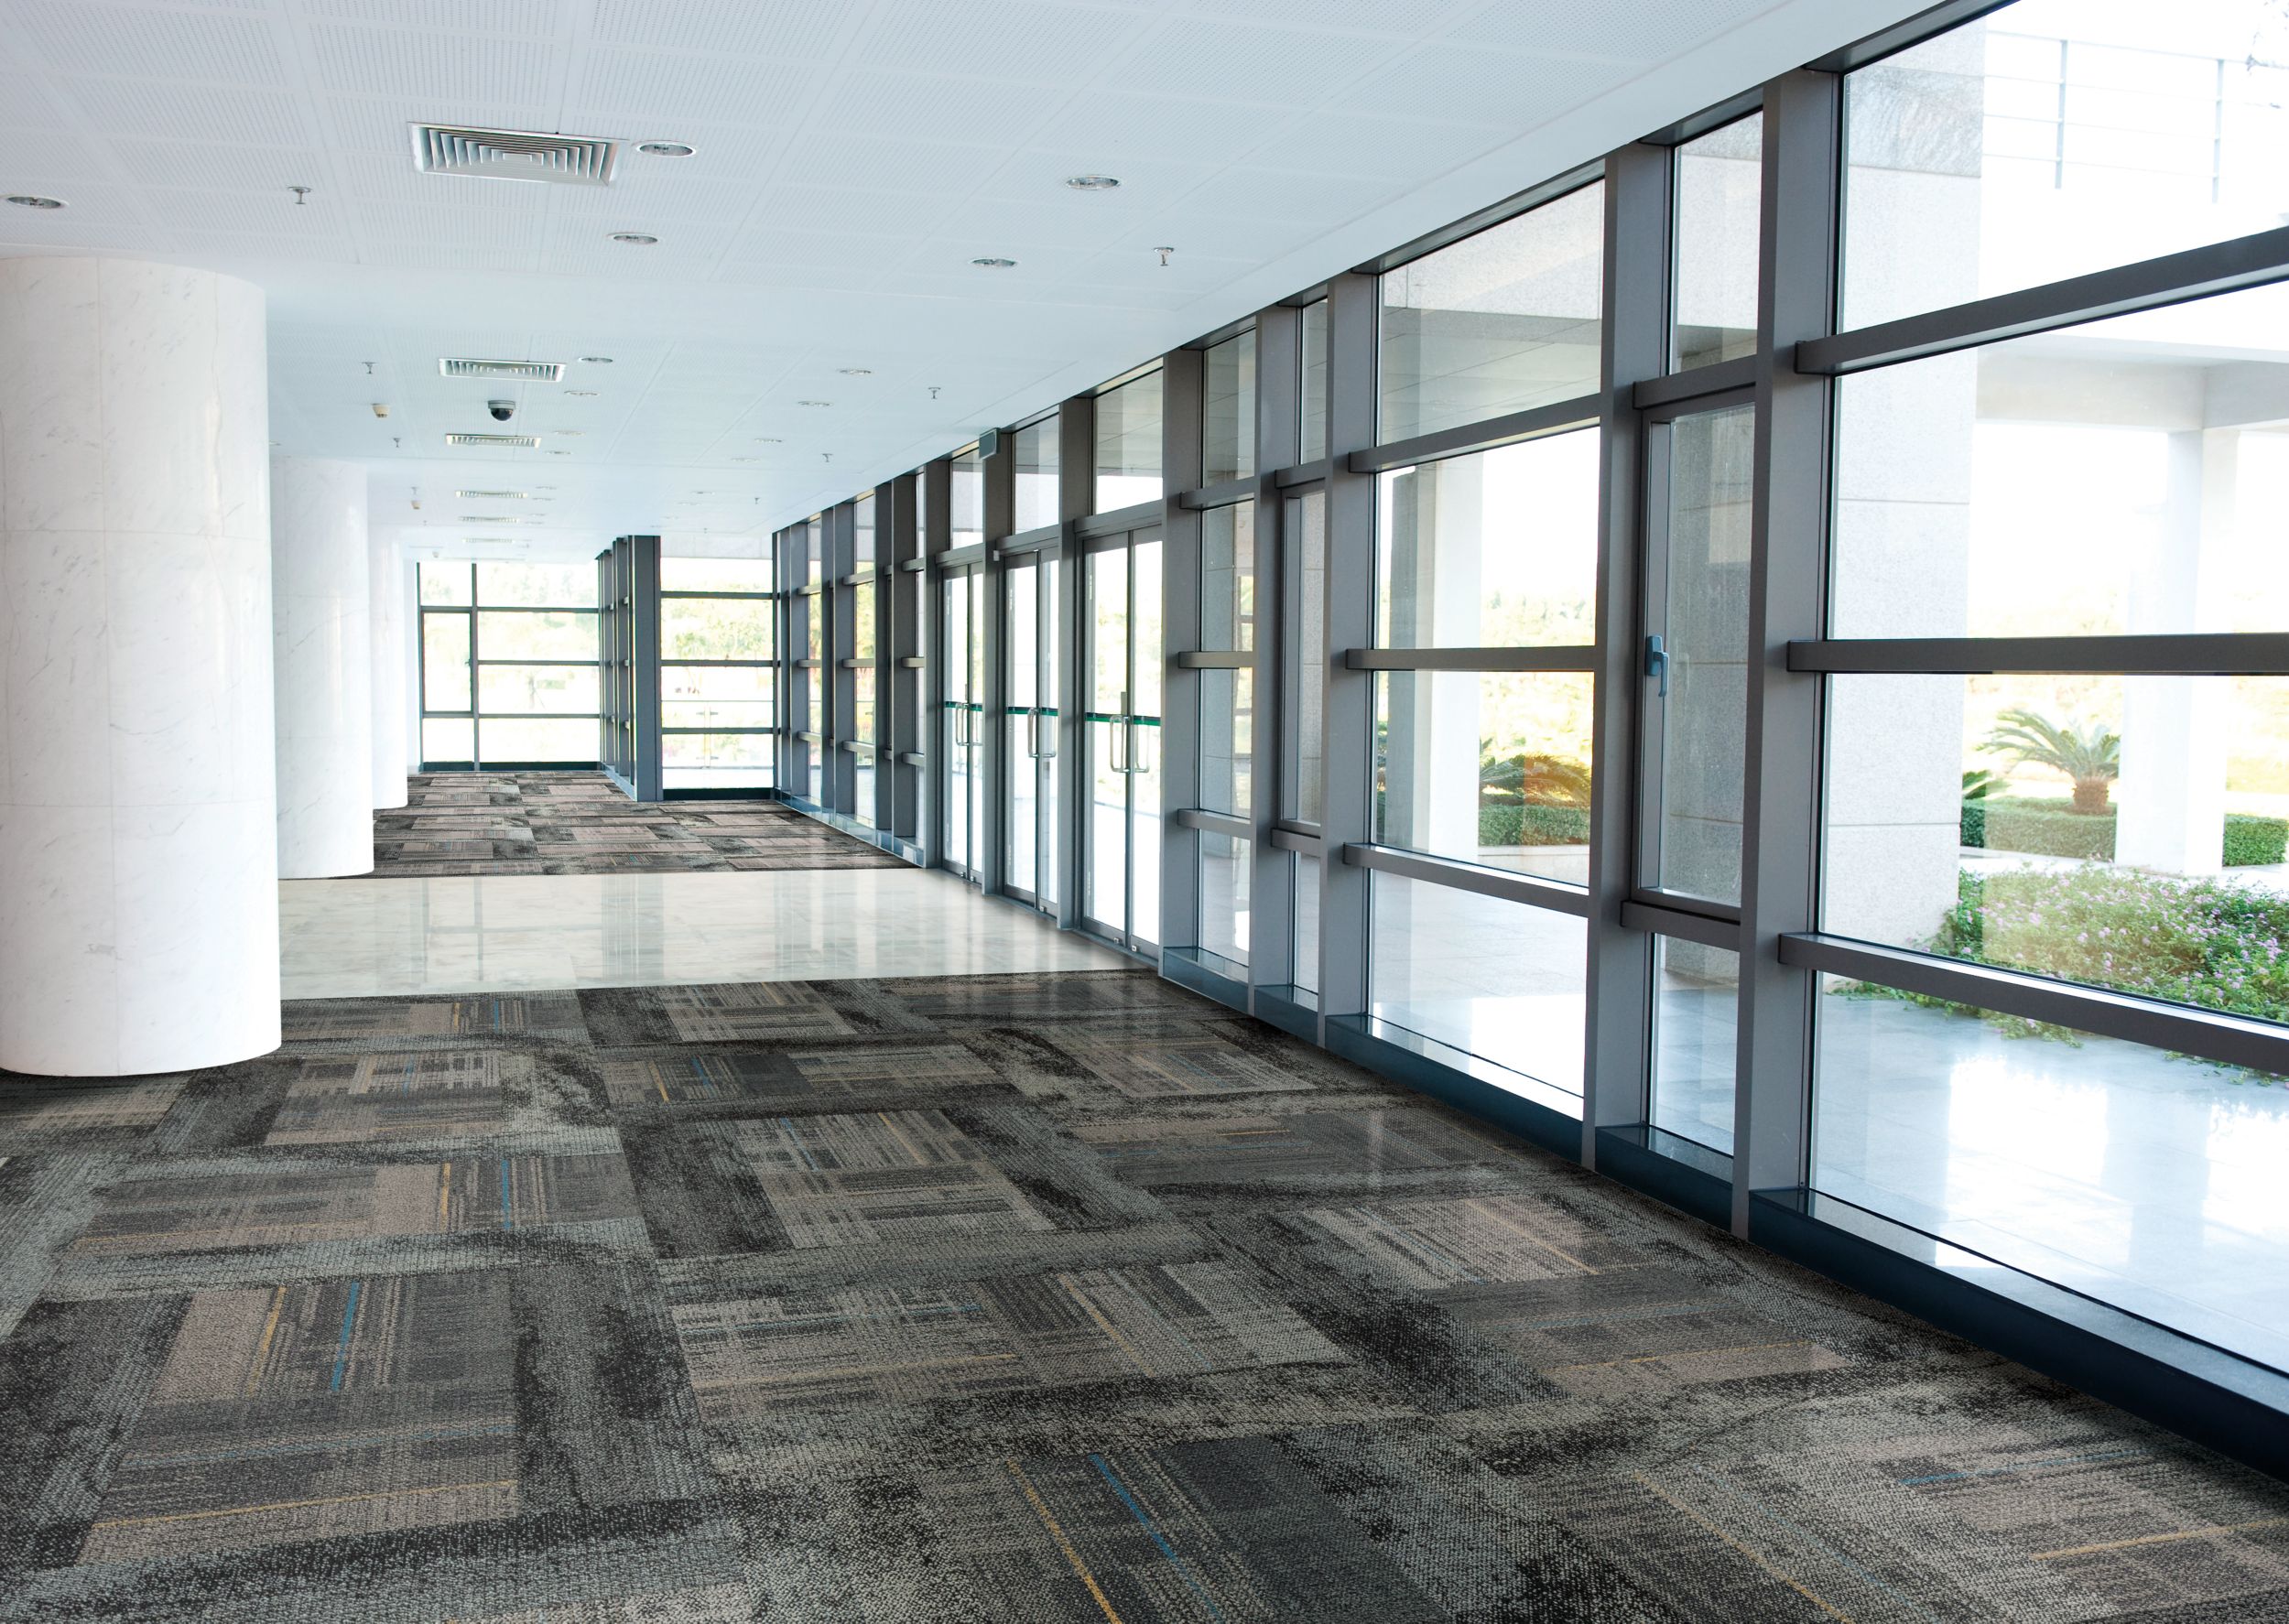 Interface AE312 carpet tile with Neighborhood Smooth plank carpet tile and Interface Textured Stones LVT in corridor with glass walls image number 13